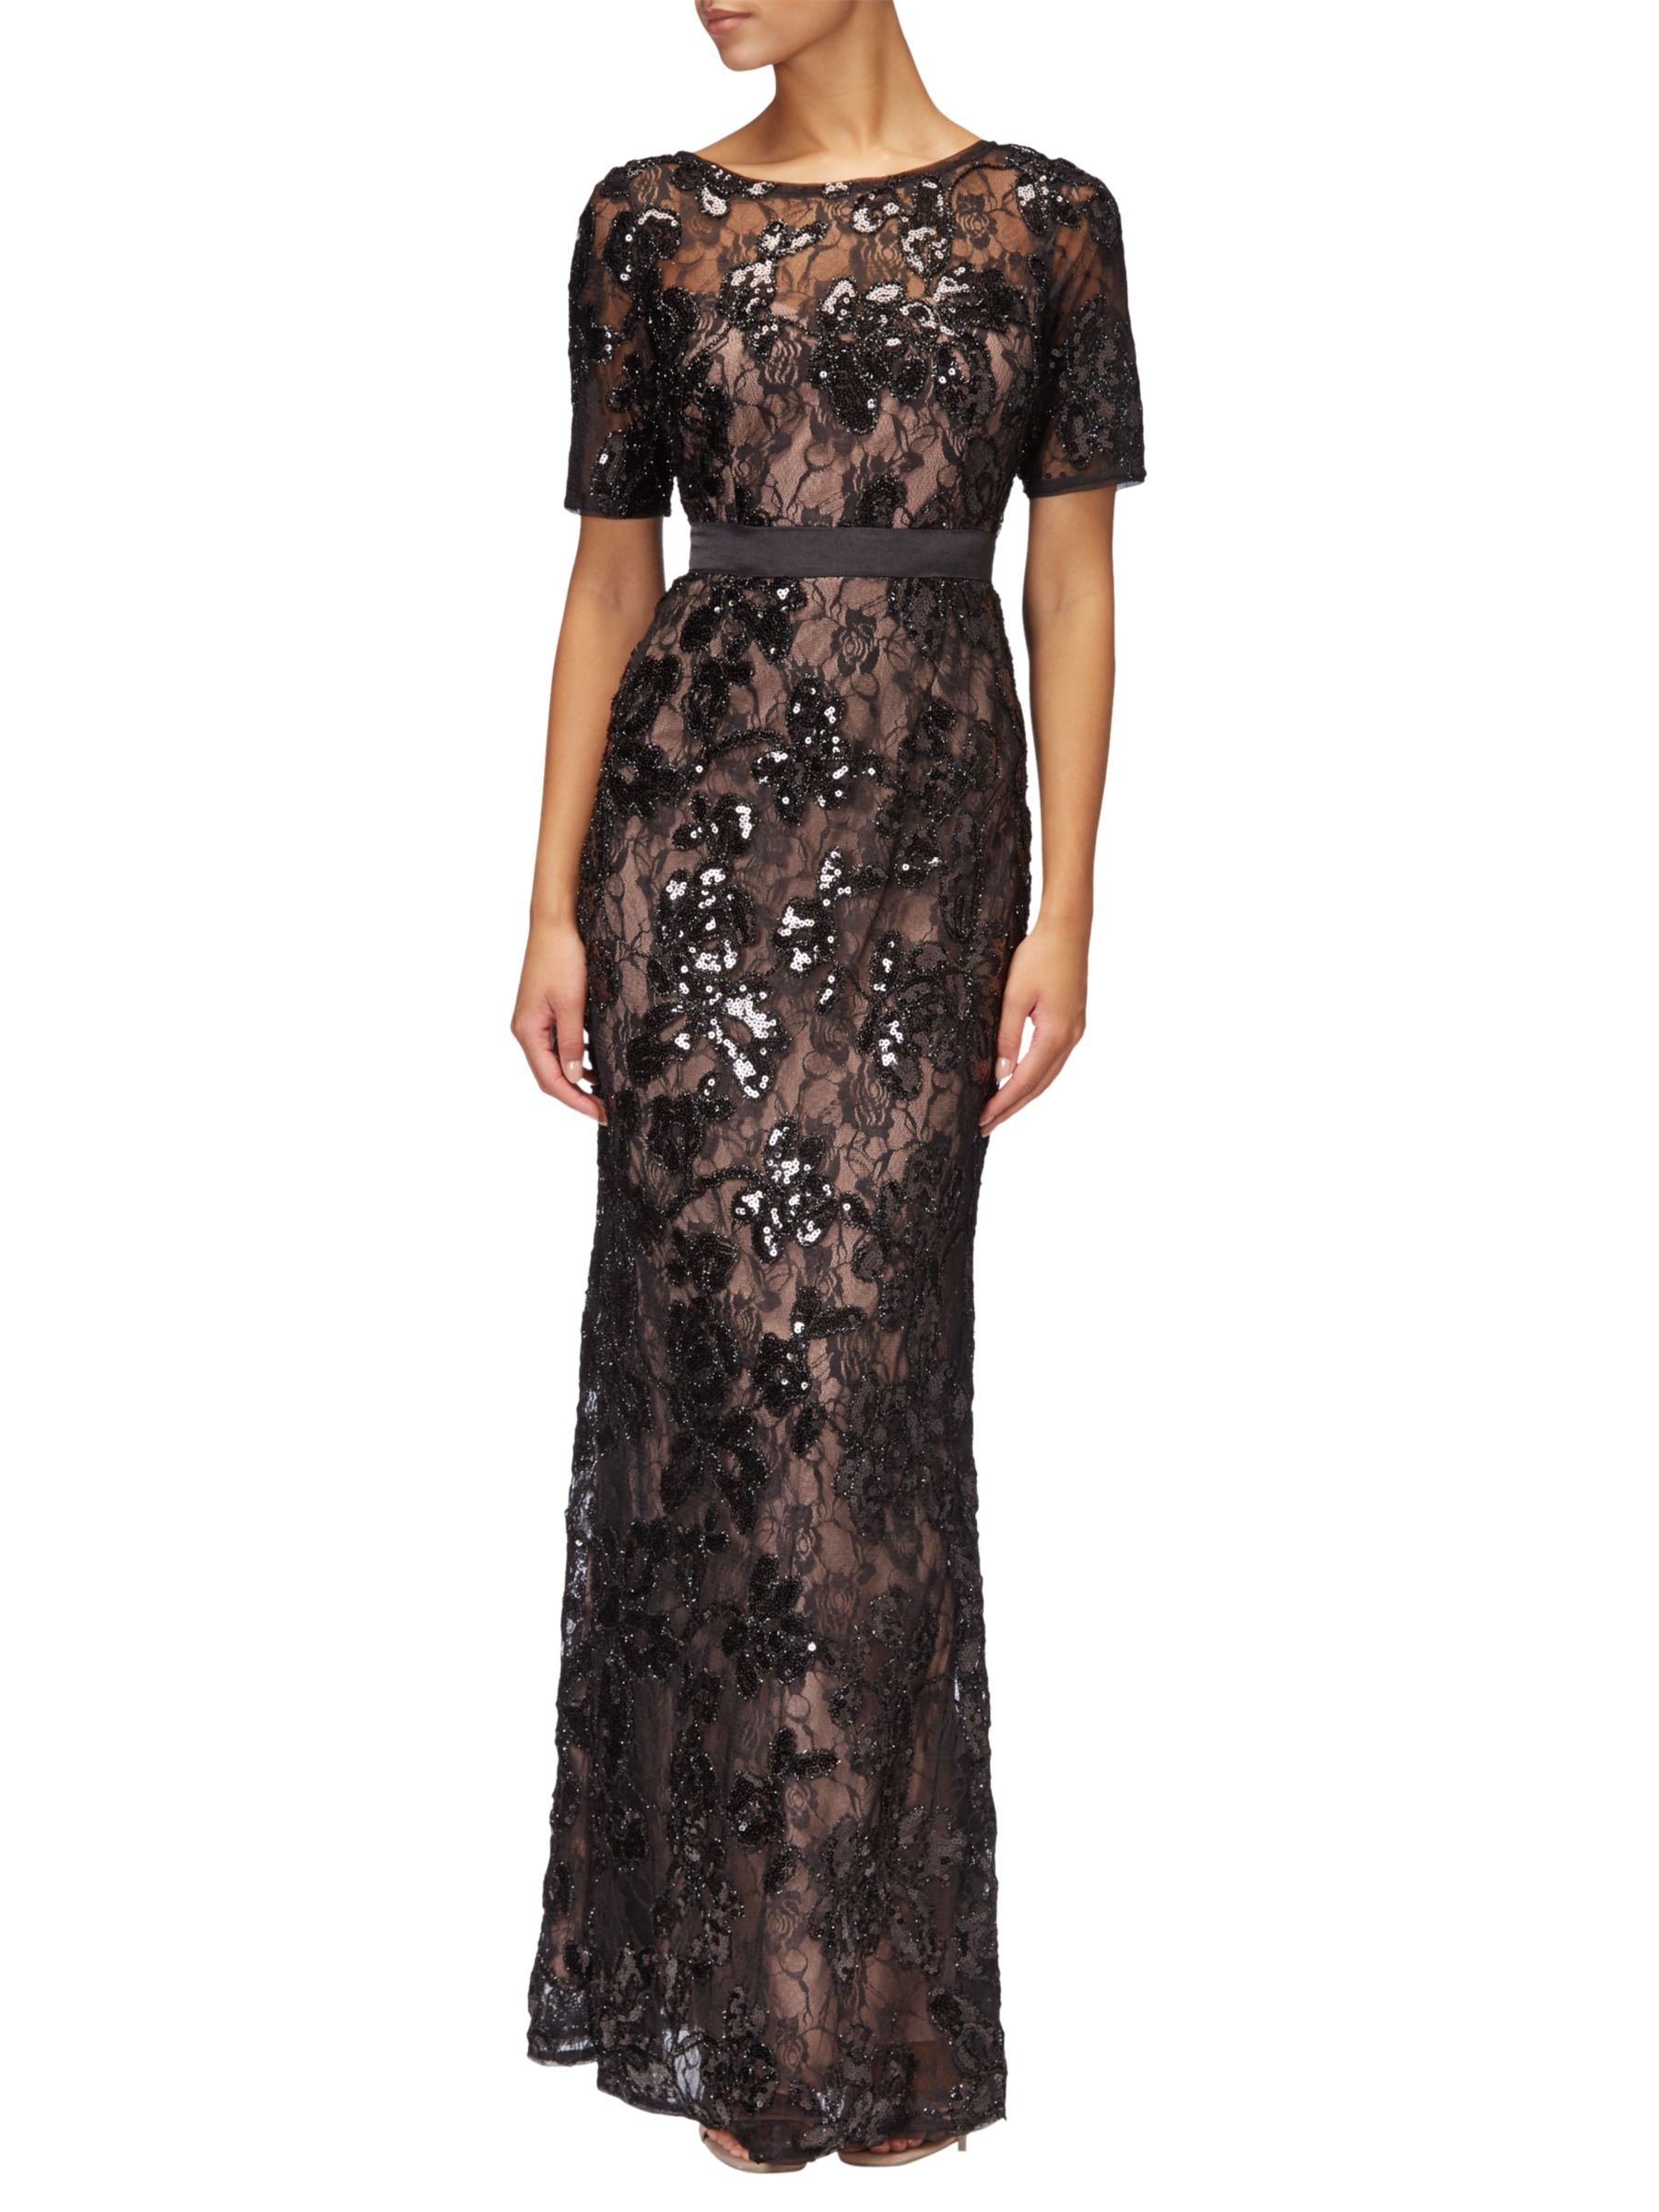 Adrianna Papell Sequined Lace Long Dress, Black/Nude at John Lewis ...